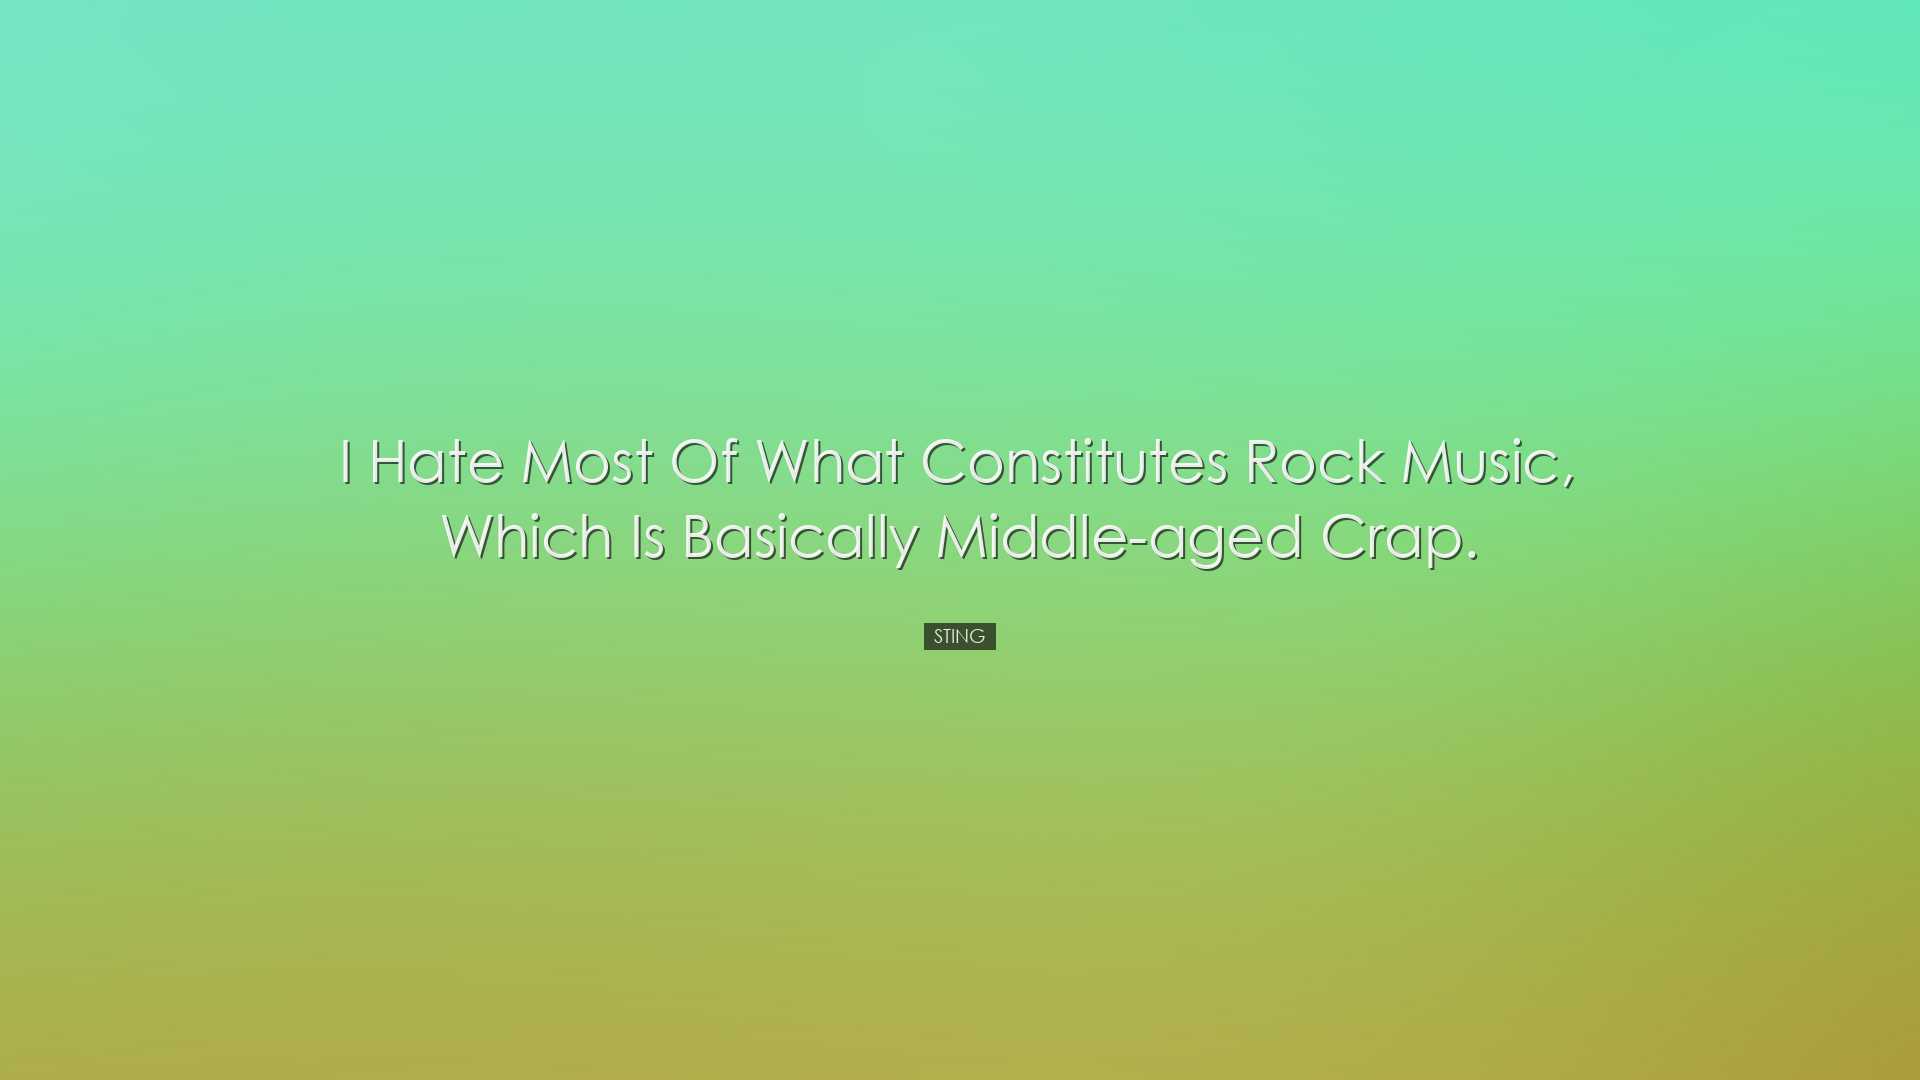 I hate most of what constitutes rock music, which is basically mid